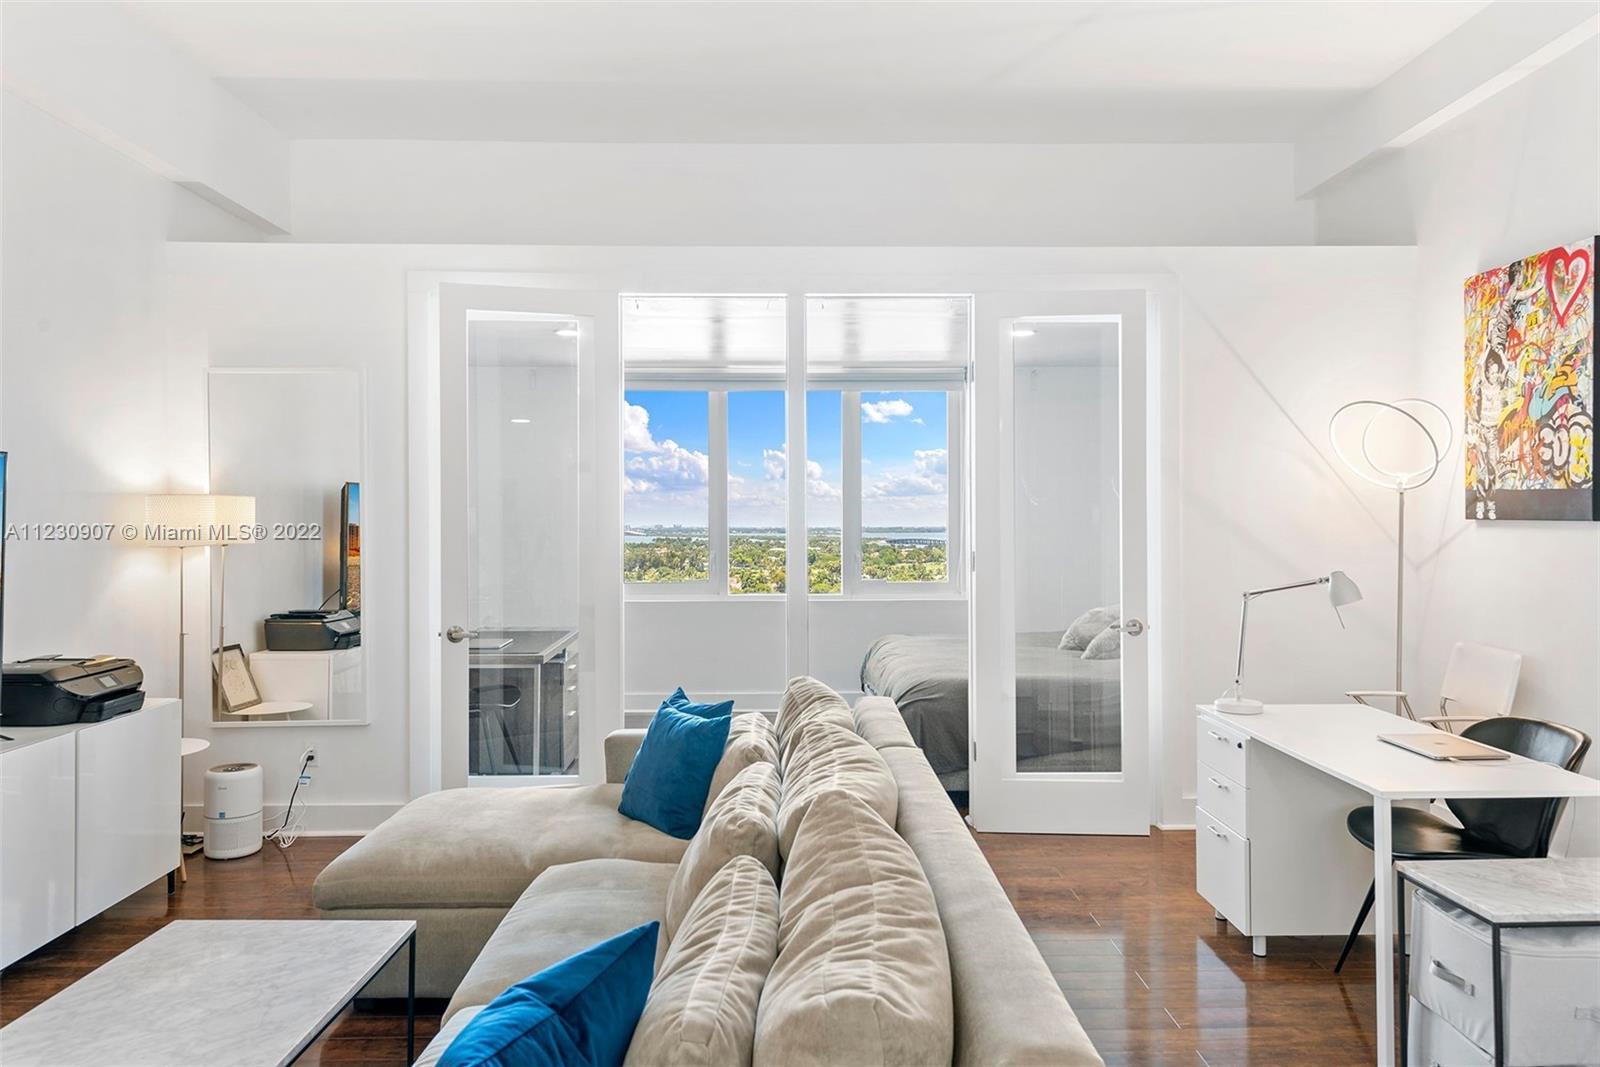 RARELY AVAIL 12" FT HIGH CEILING UNIT, w/GORGEOUS BAY & SUNSET VIEWS. Renovated w/wood floors & marb